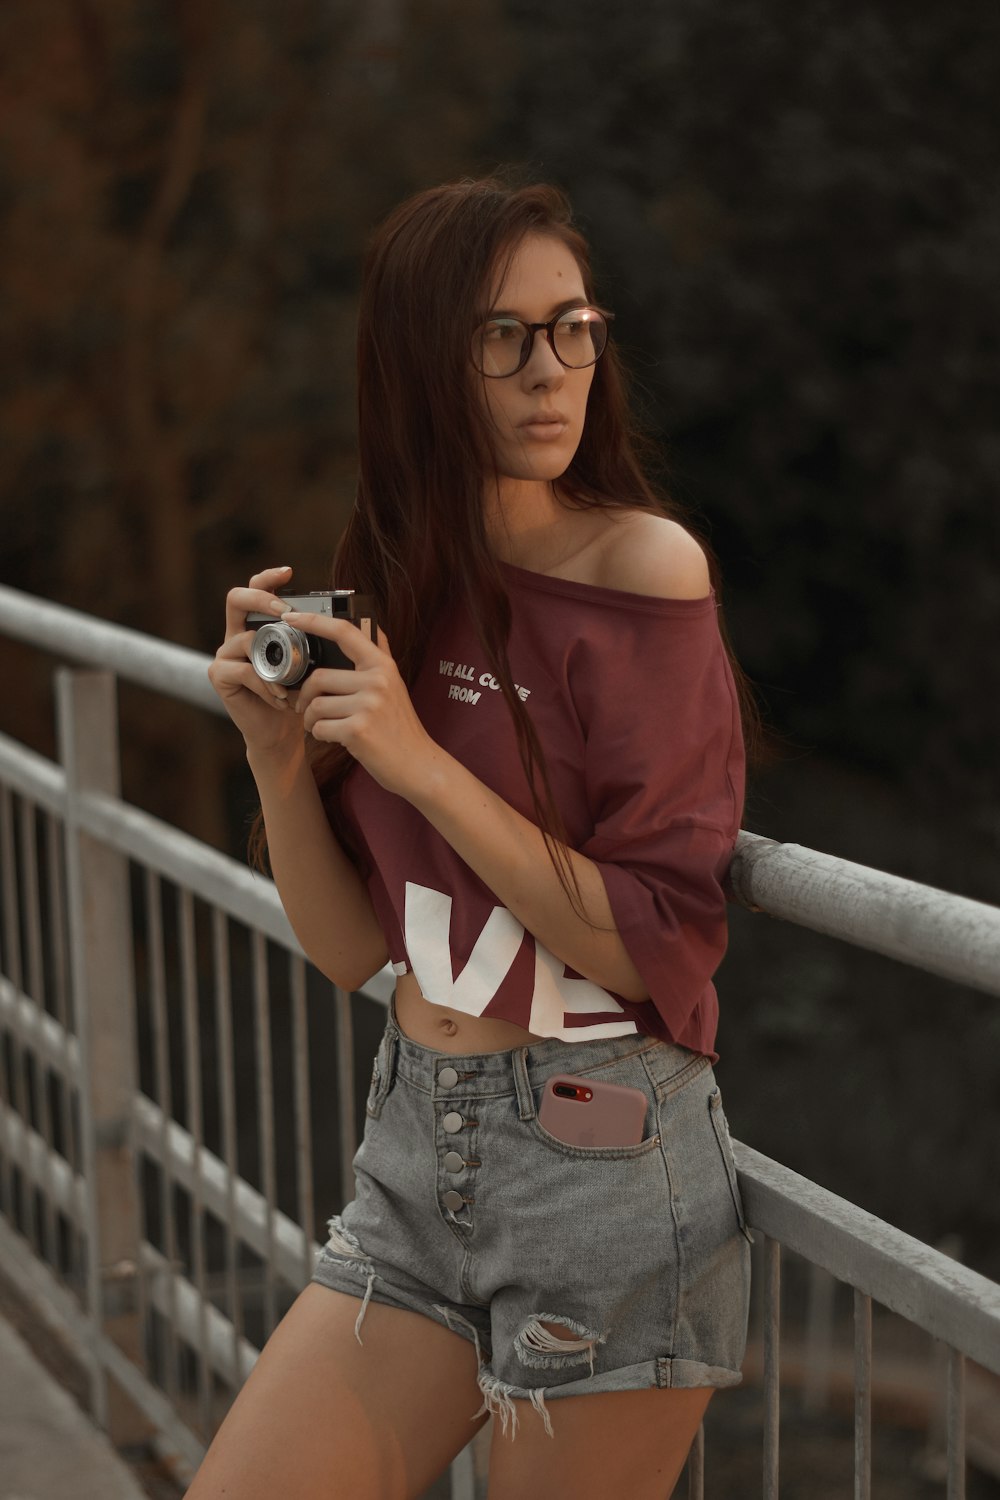 a woman with glasses is holding a camera